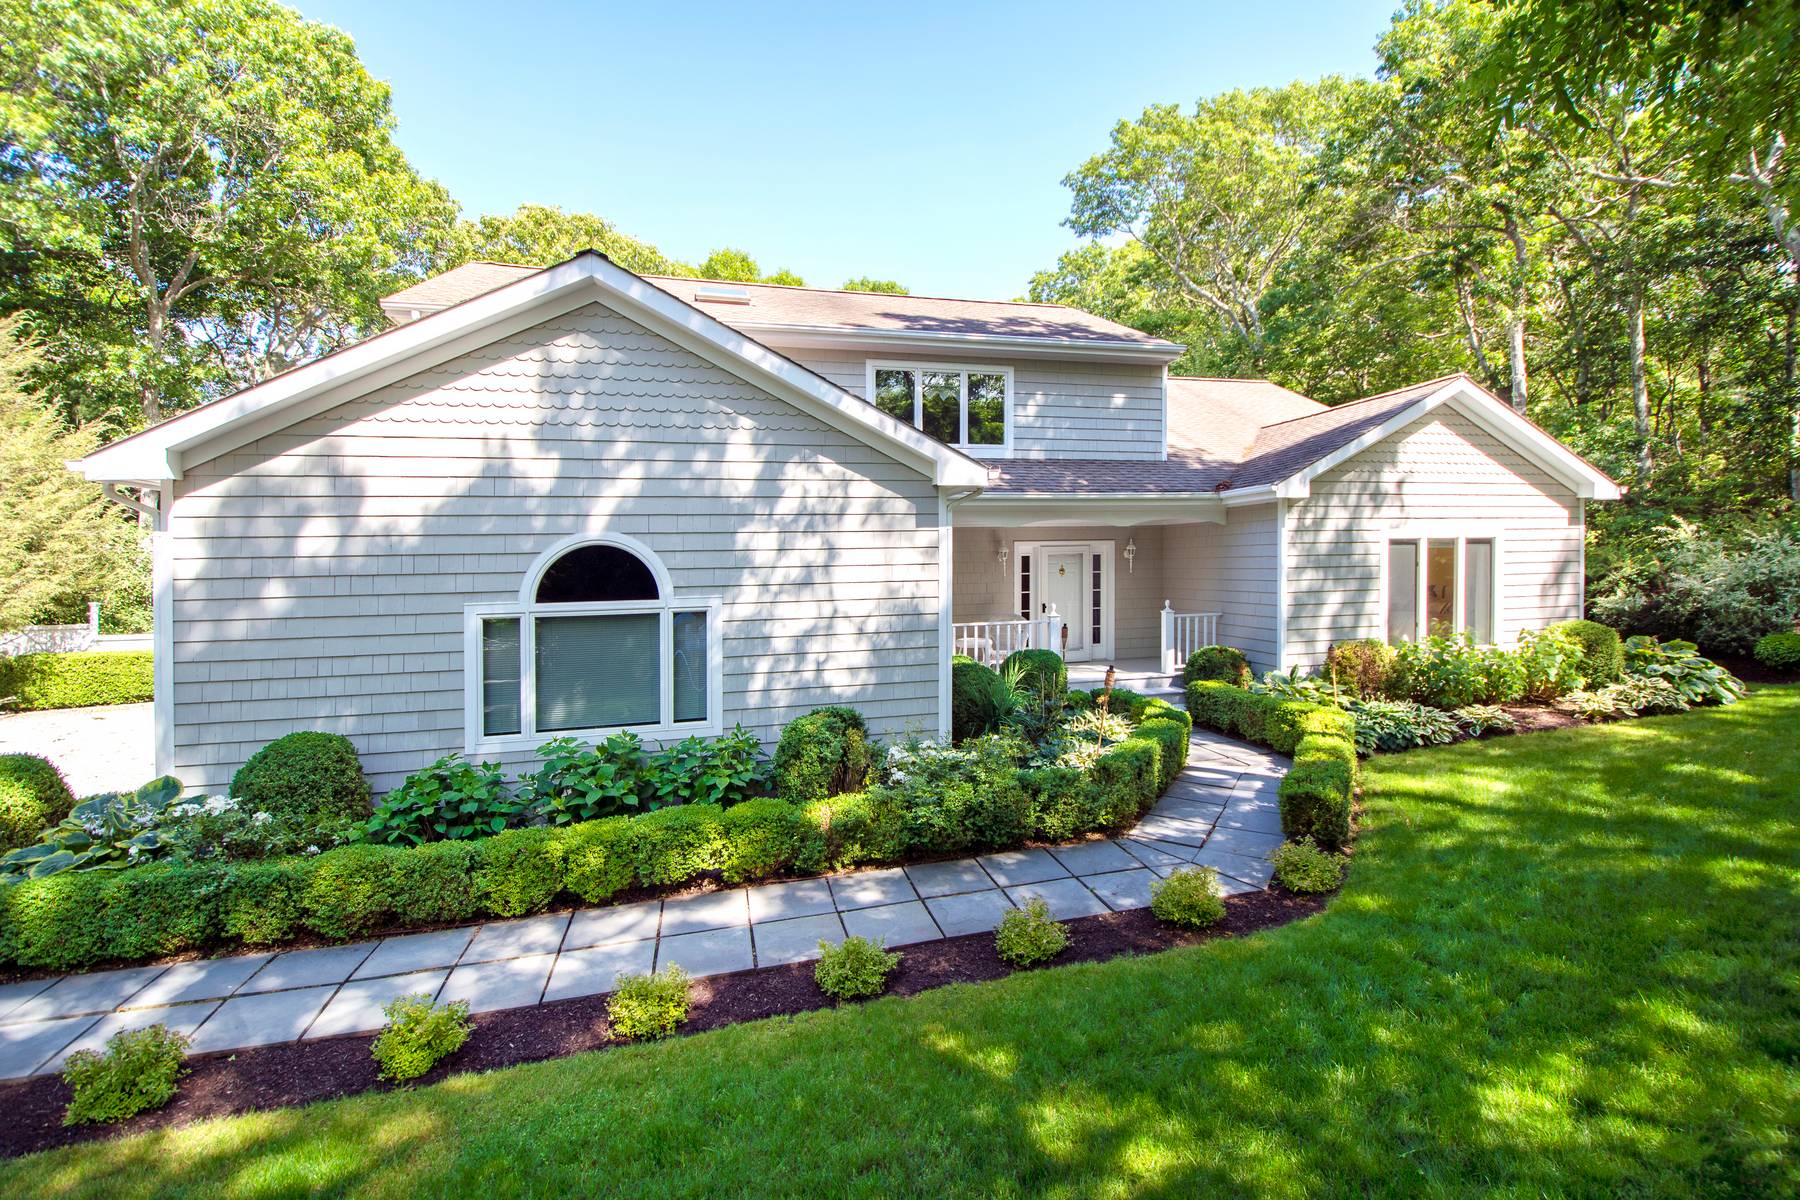 SAG HARBOR SPACIOUS 4 BEDROOM WITH LOVELY PRIVATE POOL AREA